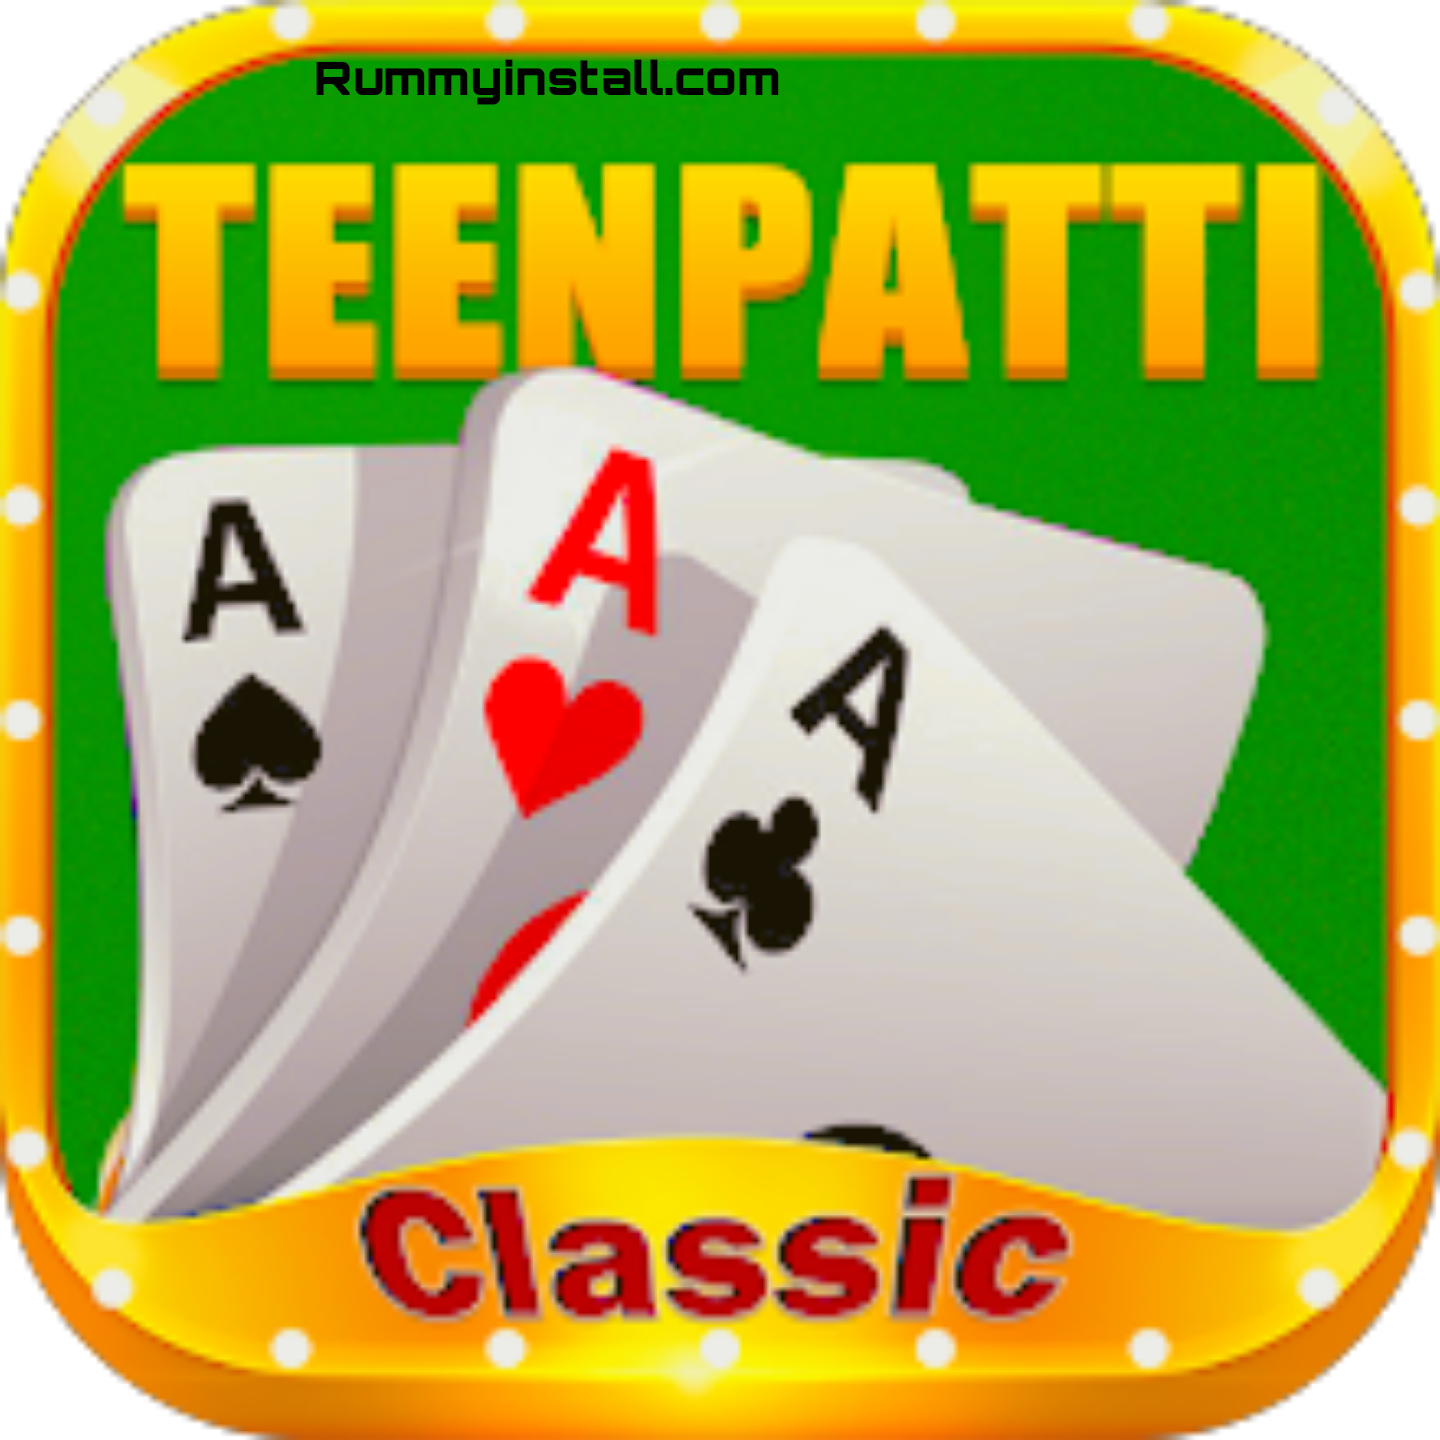 Teen Patti Classic Download & Get 61 Rupees Instant Cash